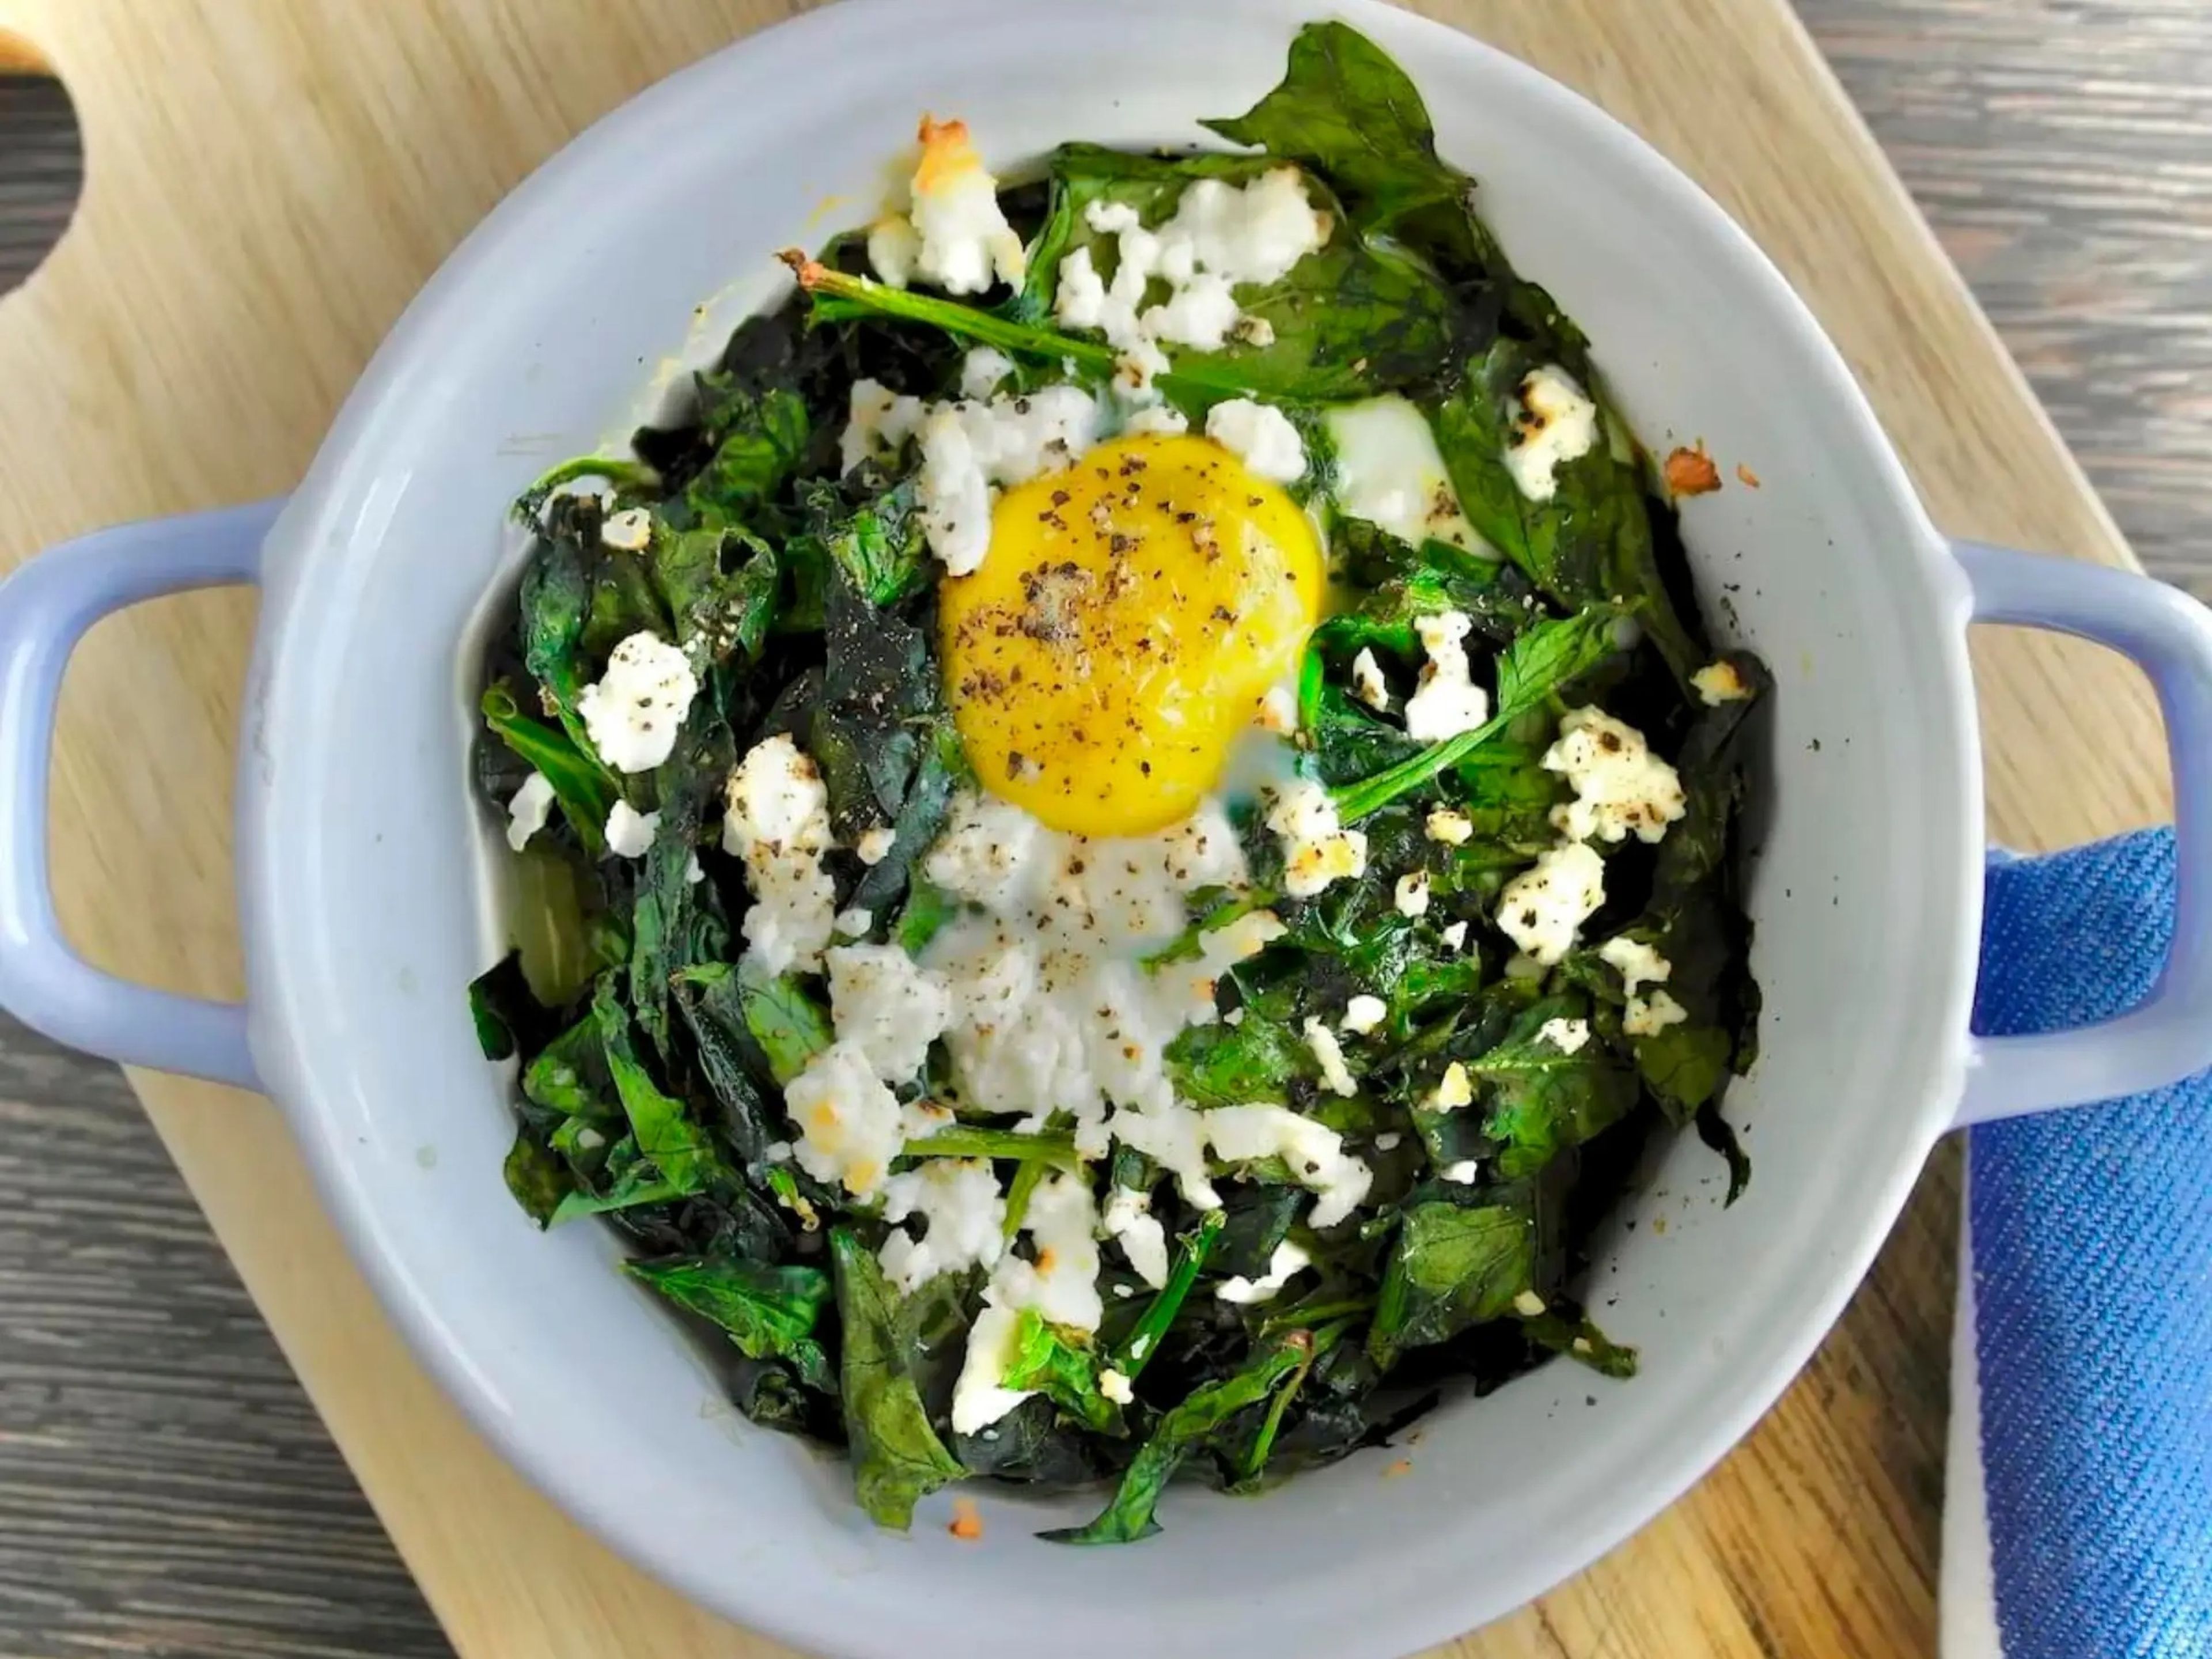 Baked spinach, feta, and eggs